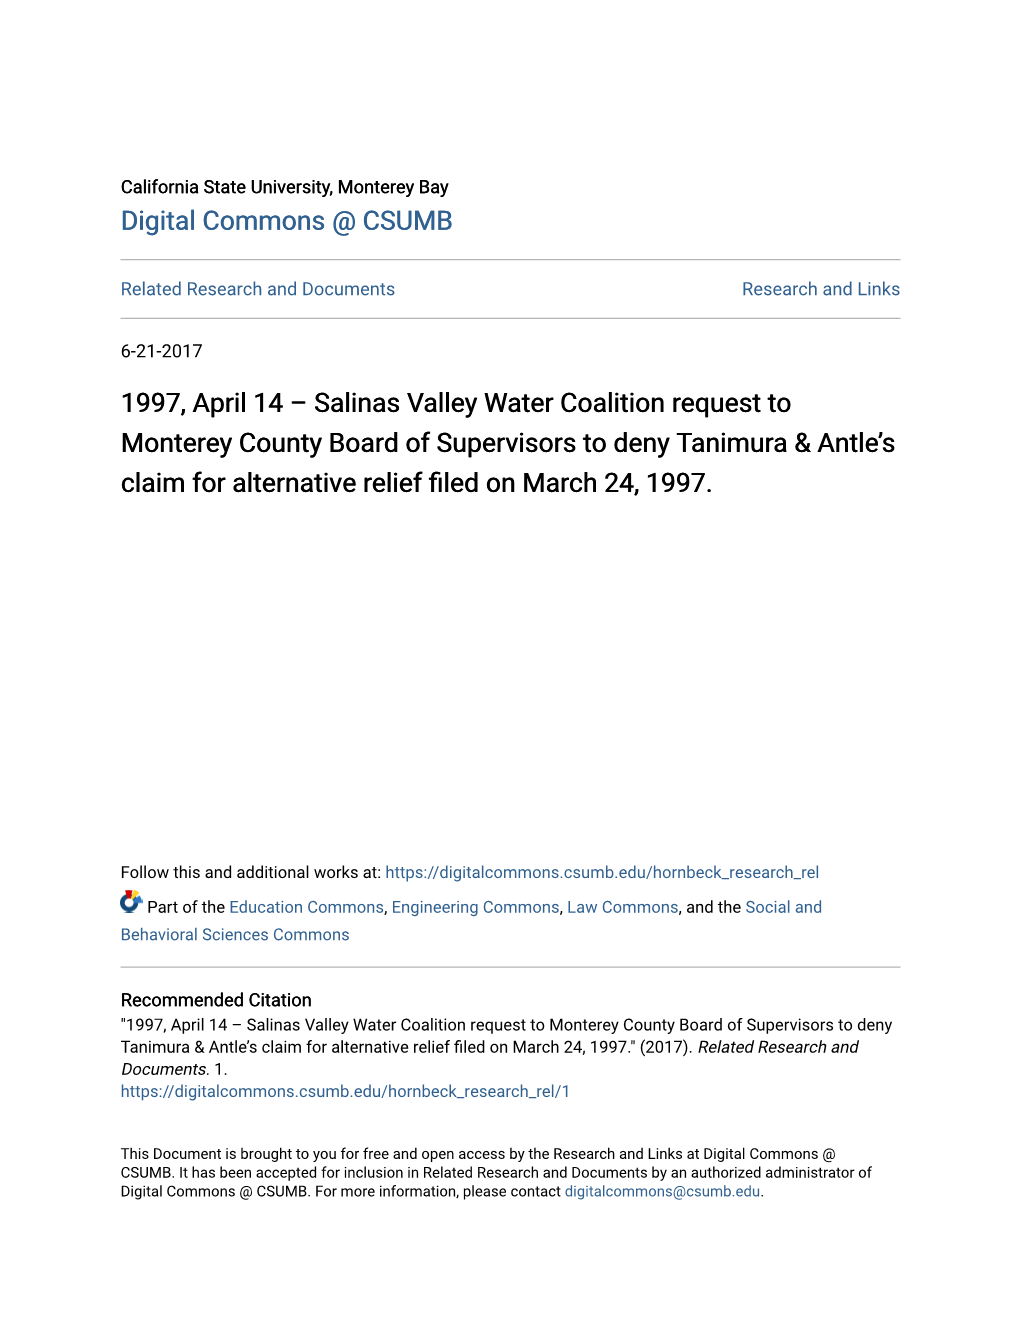 Salinas Valley Water Coalition Request to Monterey County Board of Supervisors to Deny Tanimura & Antle’S Claim for Alternative Relief Filed on March 24, 1997